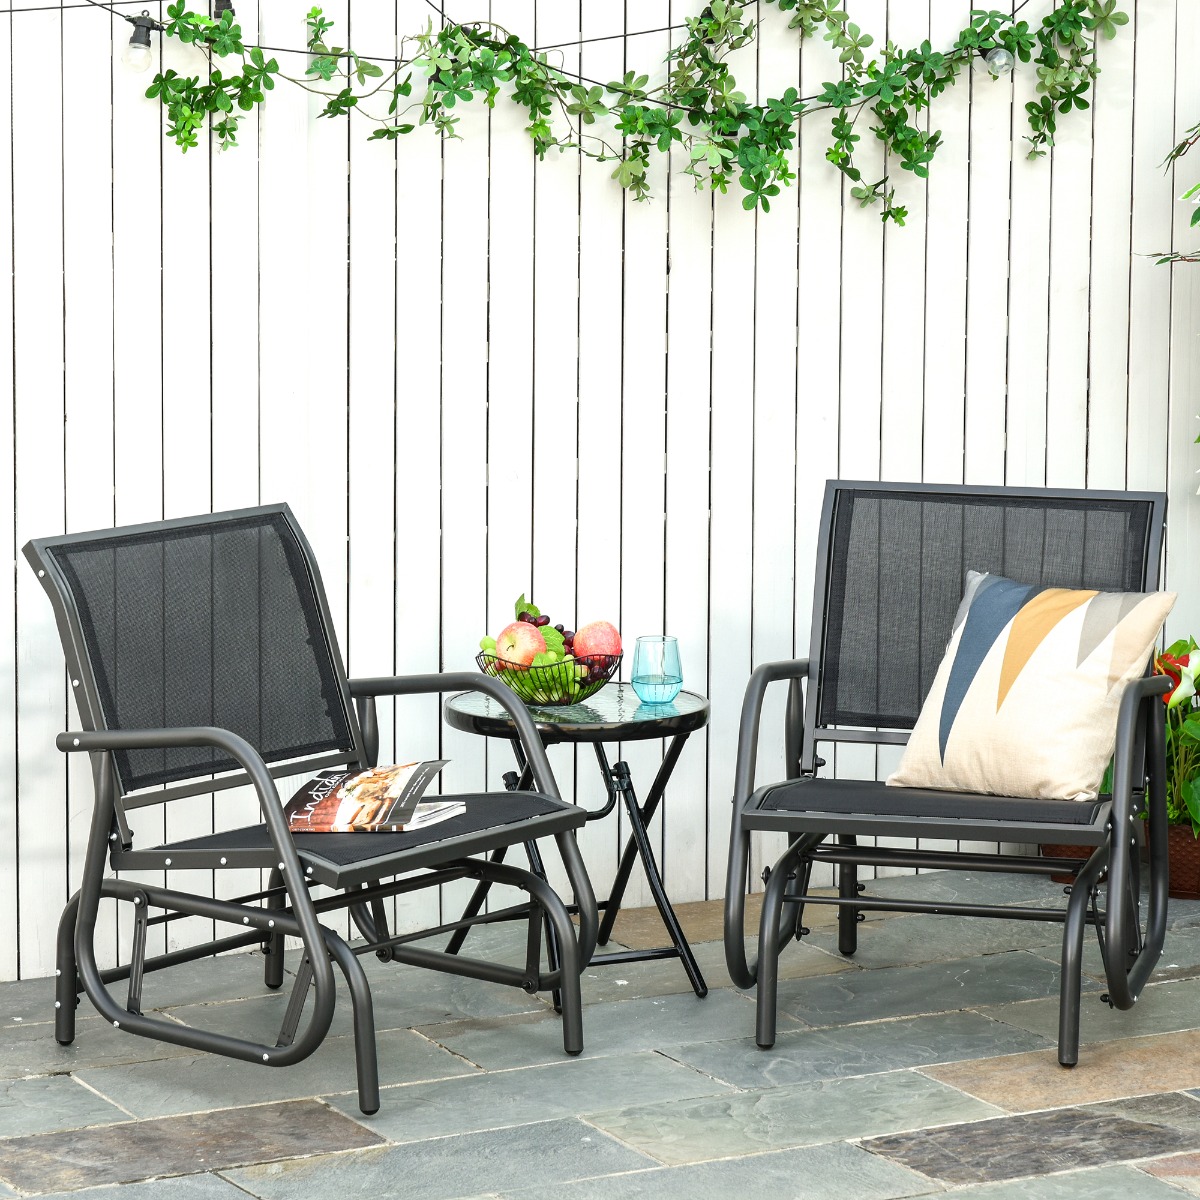 Outsunny 2-Piece Outdoor Gliding/Rocking Chair Set with Breathable Mesh Fabric, Curved Armrests & Steel Frame, Black